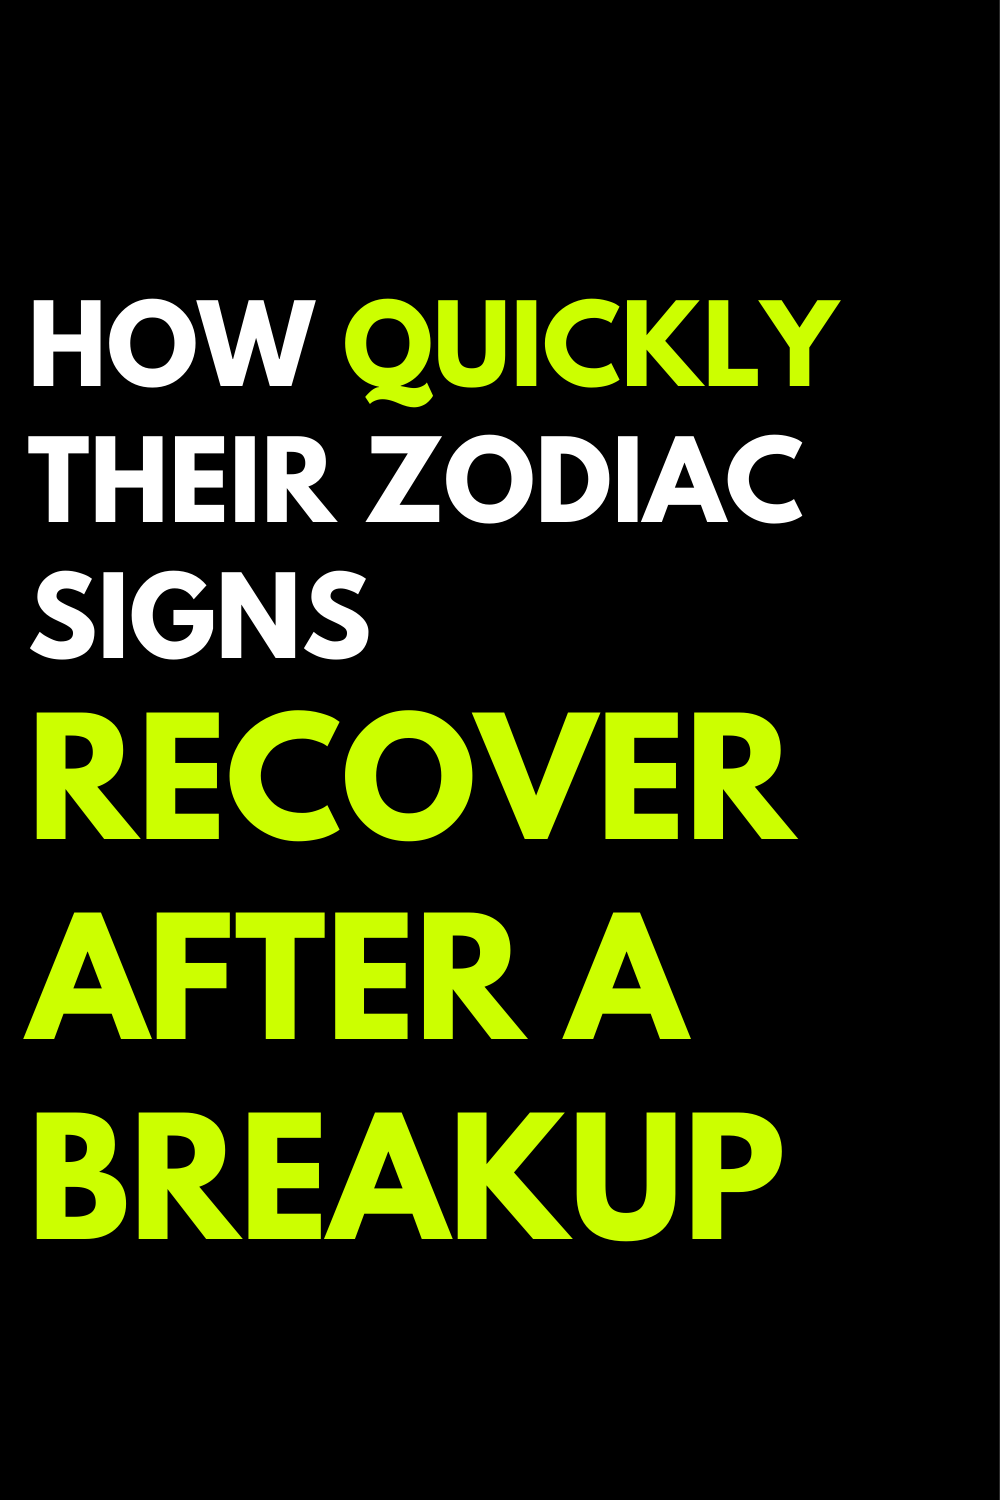 How quickly their zodiac signs recover after a breakup